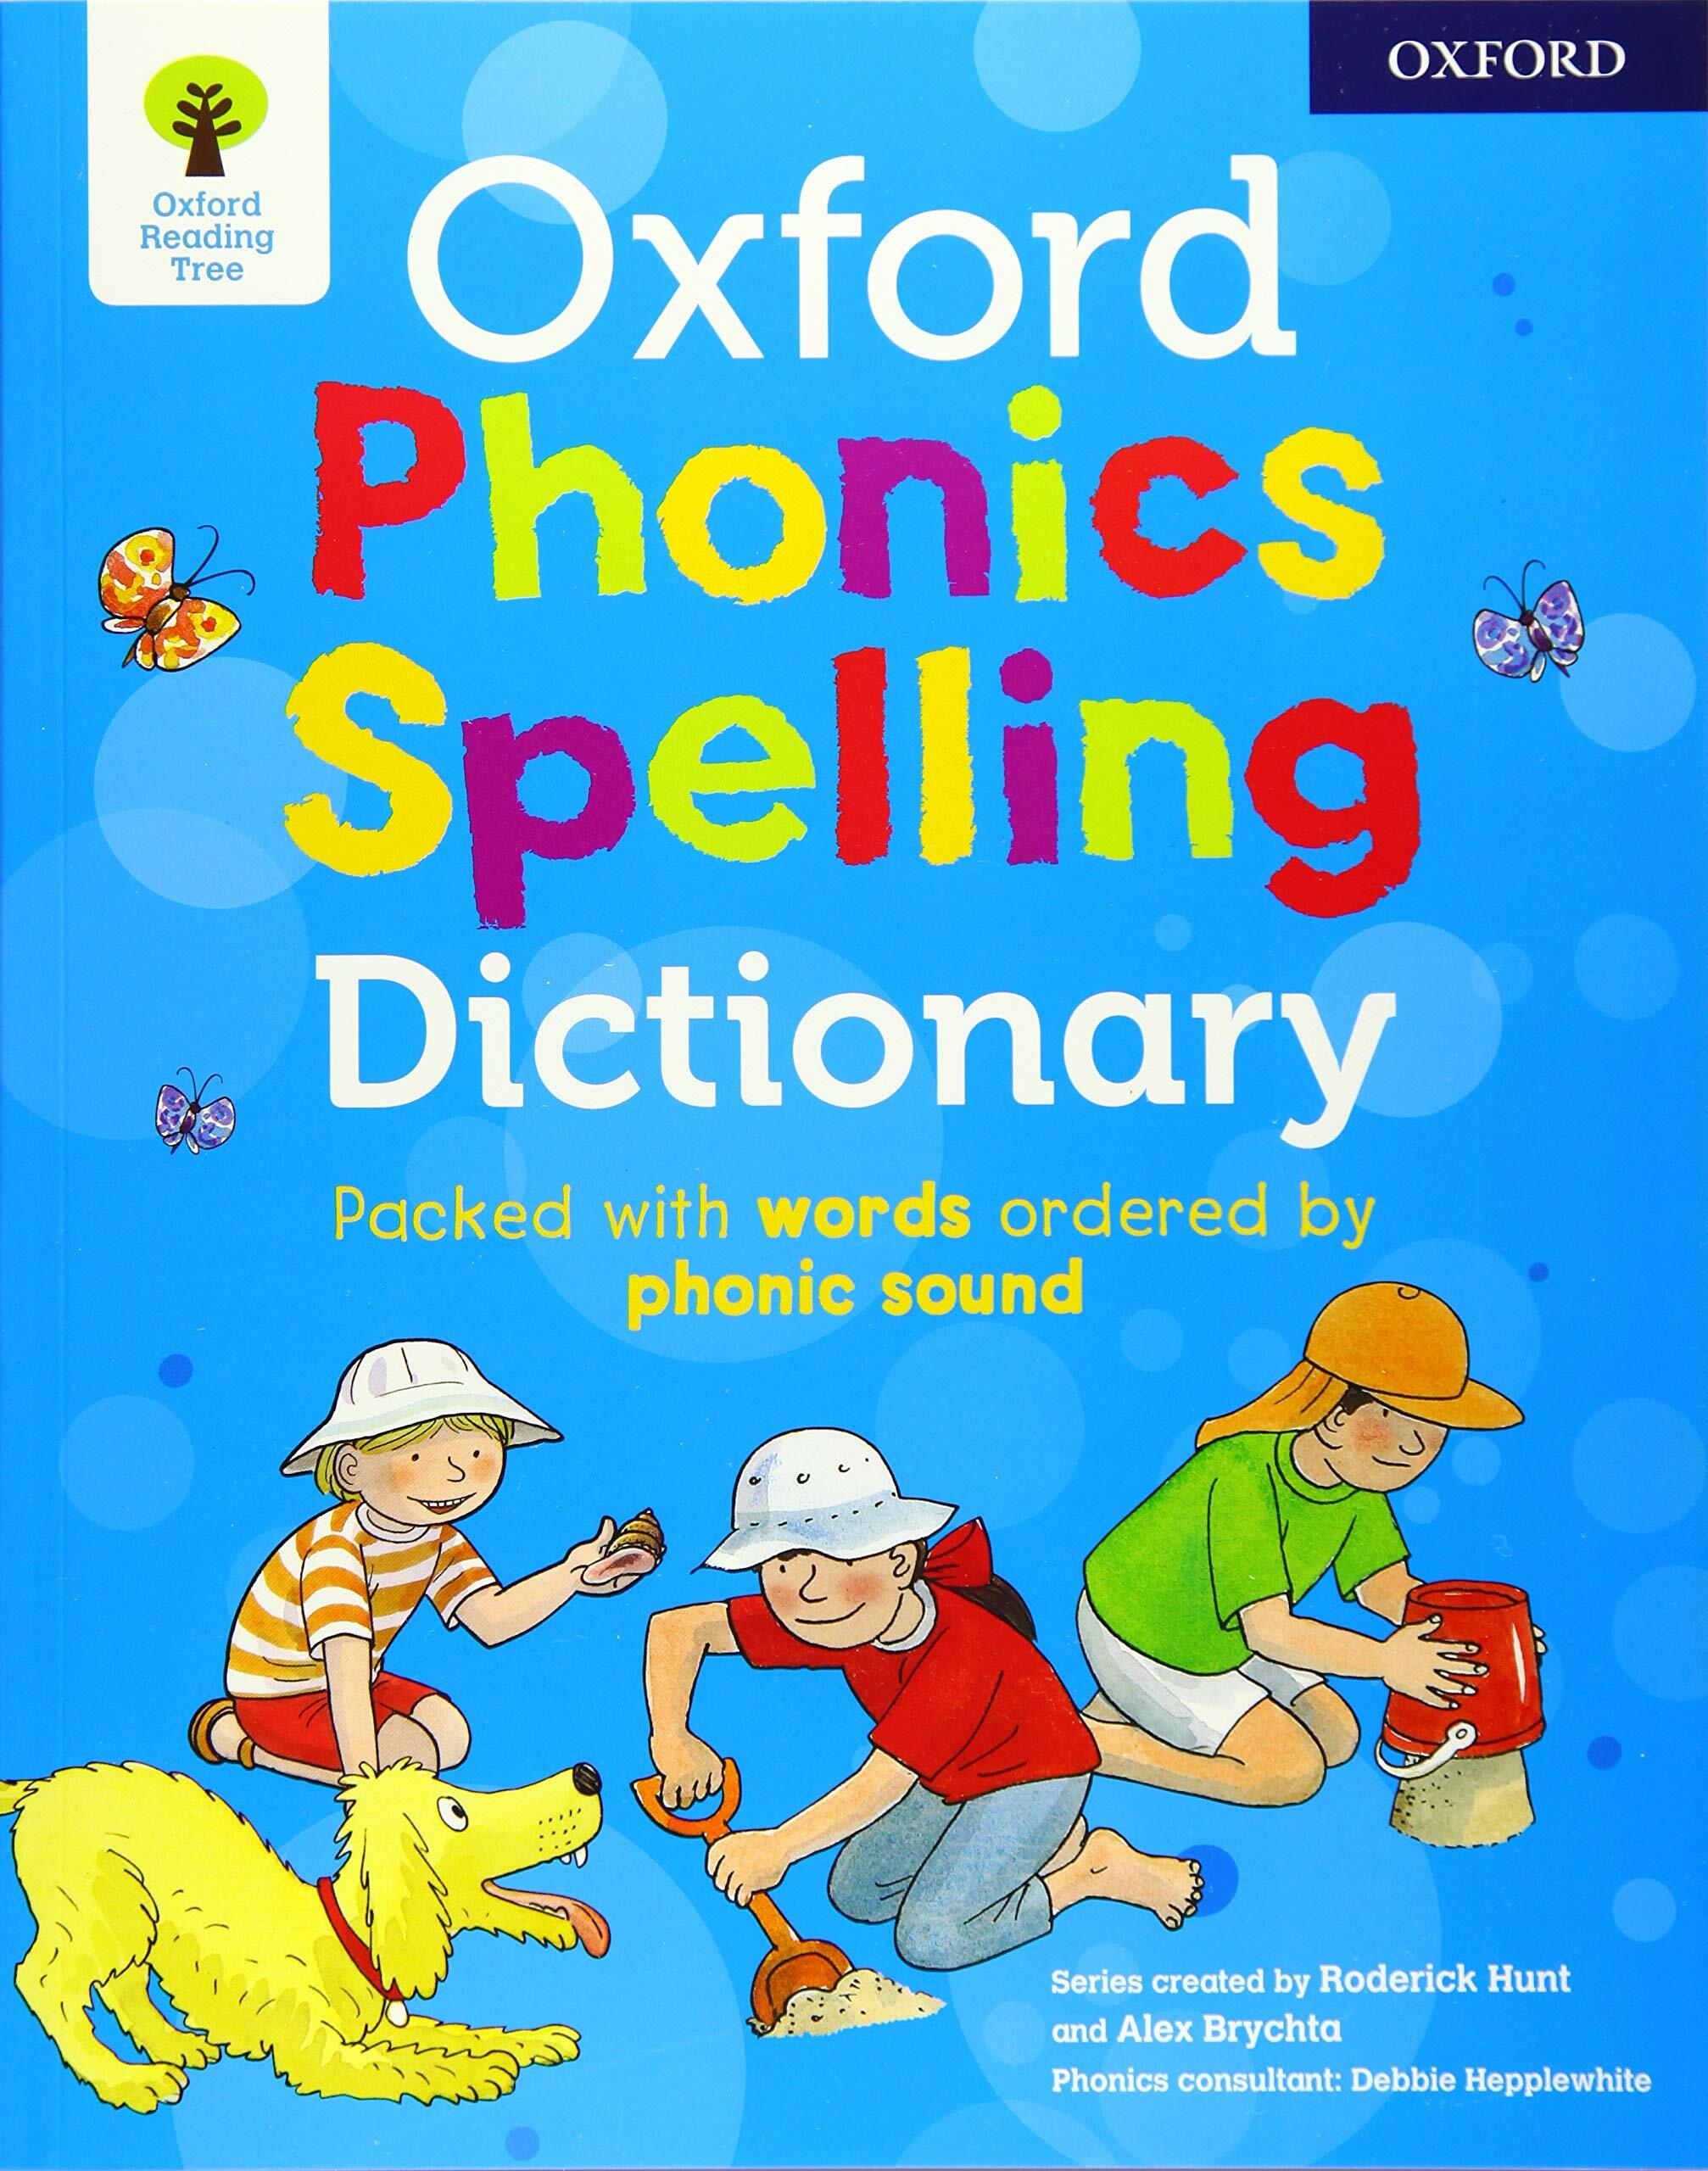 Oxford Phonics Spelling Dictionary (Paperback)